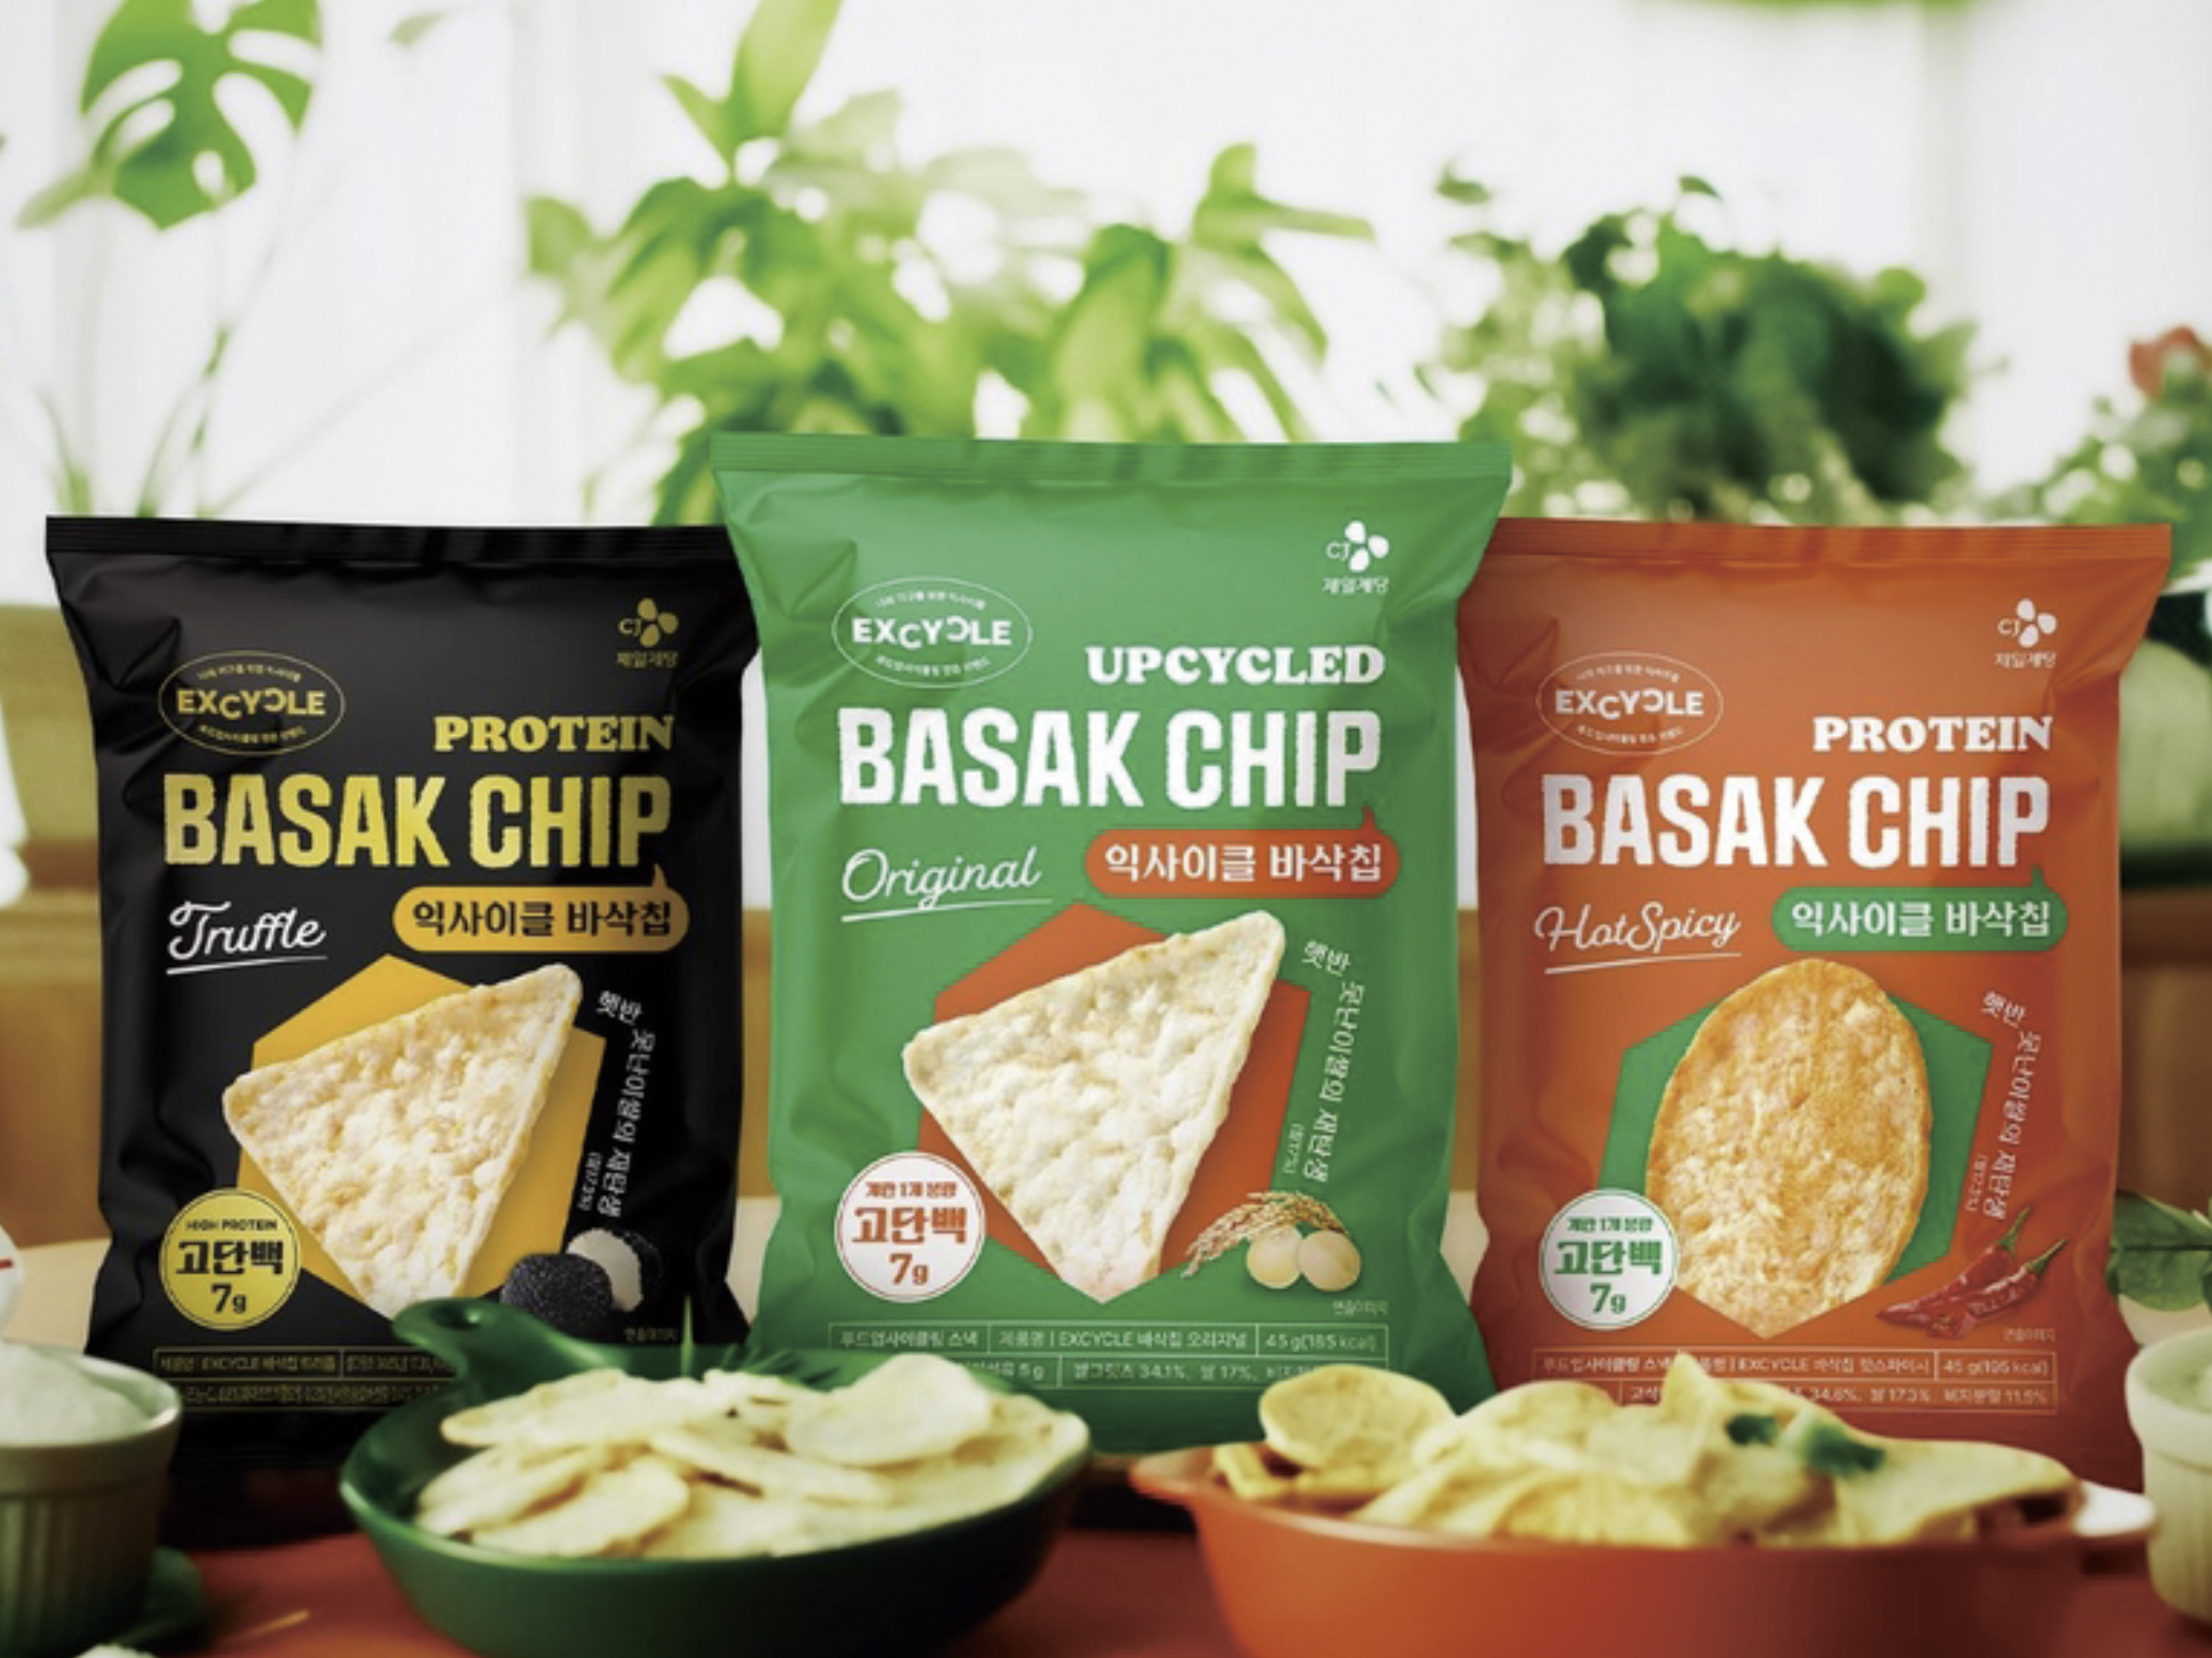 Excycle Basak Chip: A High-Protein snack made with upcycled food ingredients